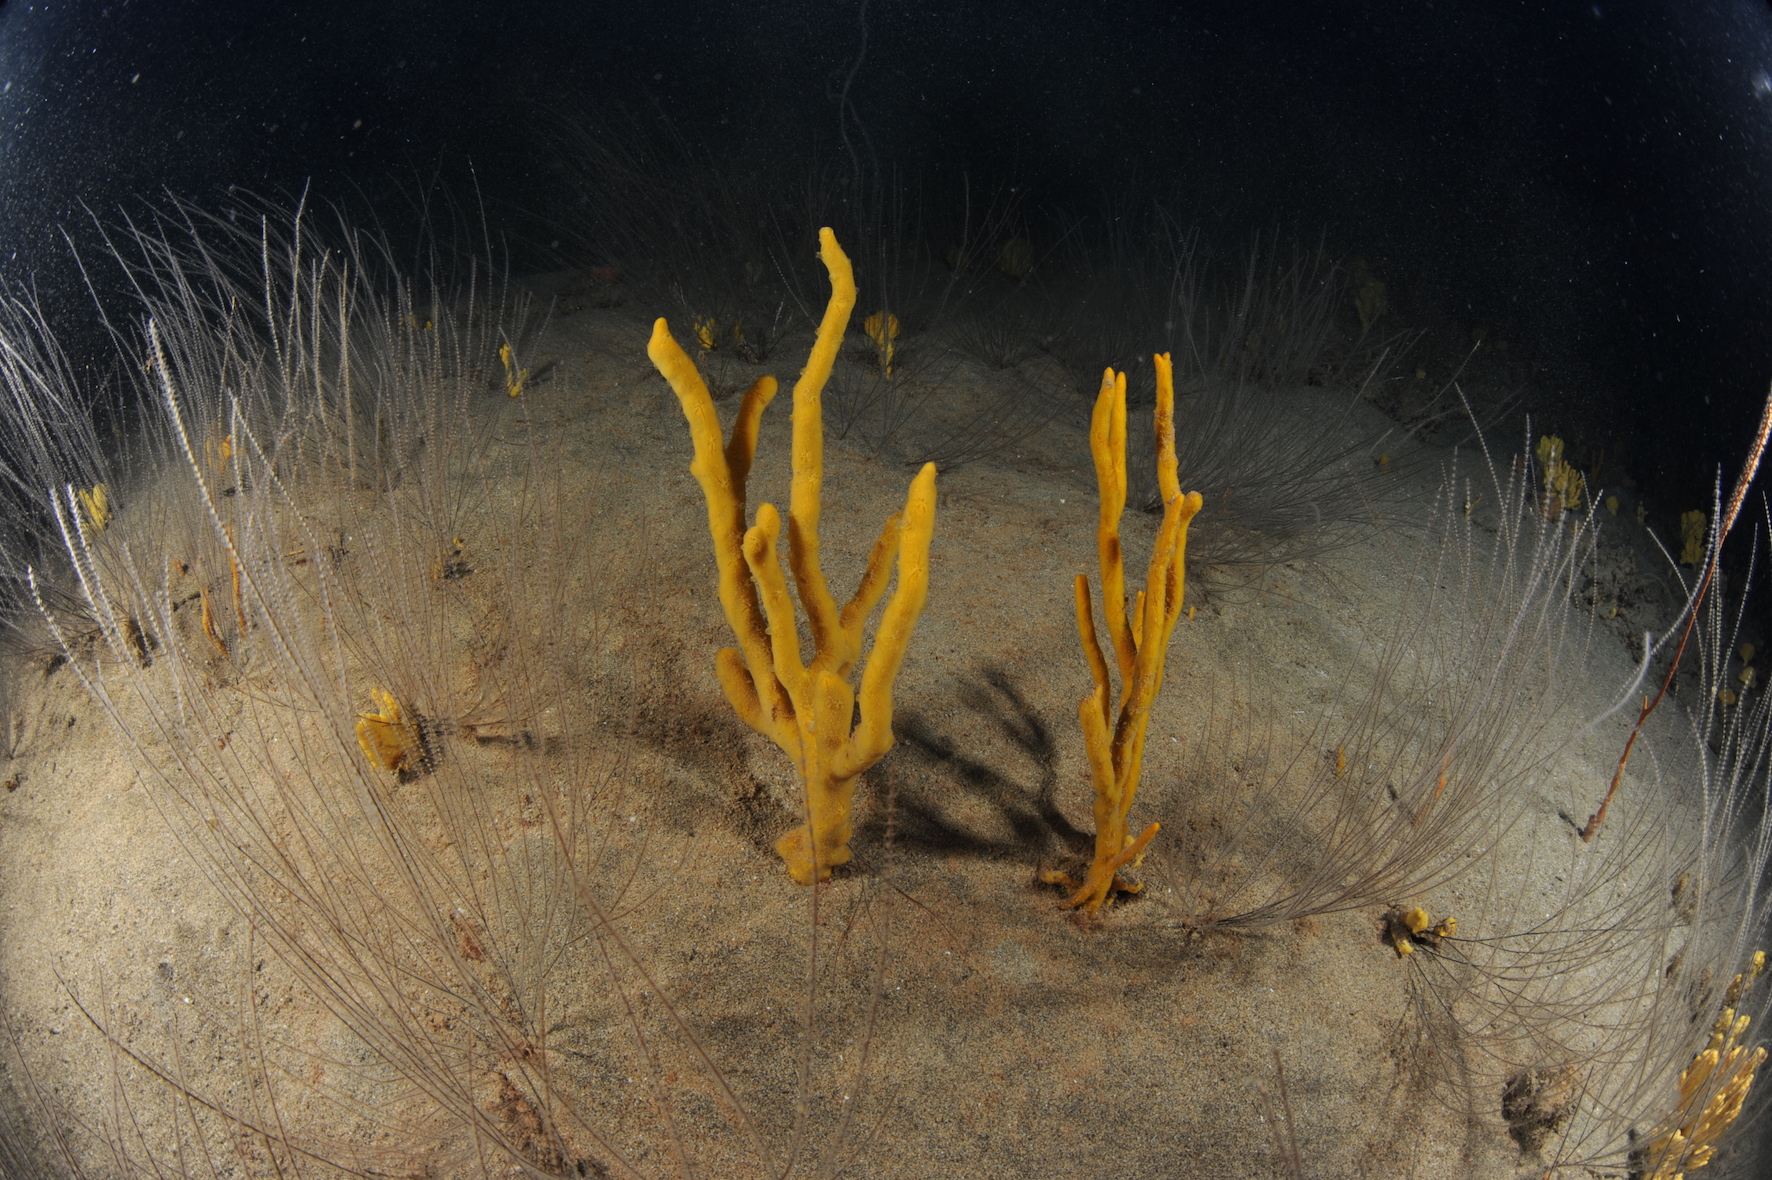 The Research about underwater black coral forests starts in Lanzarote